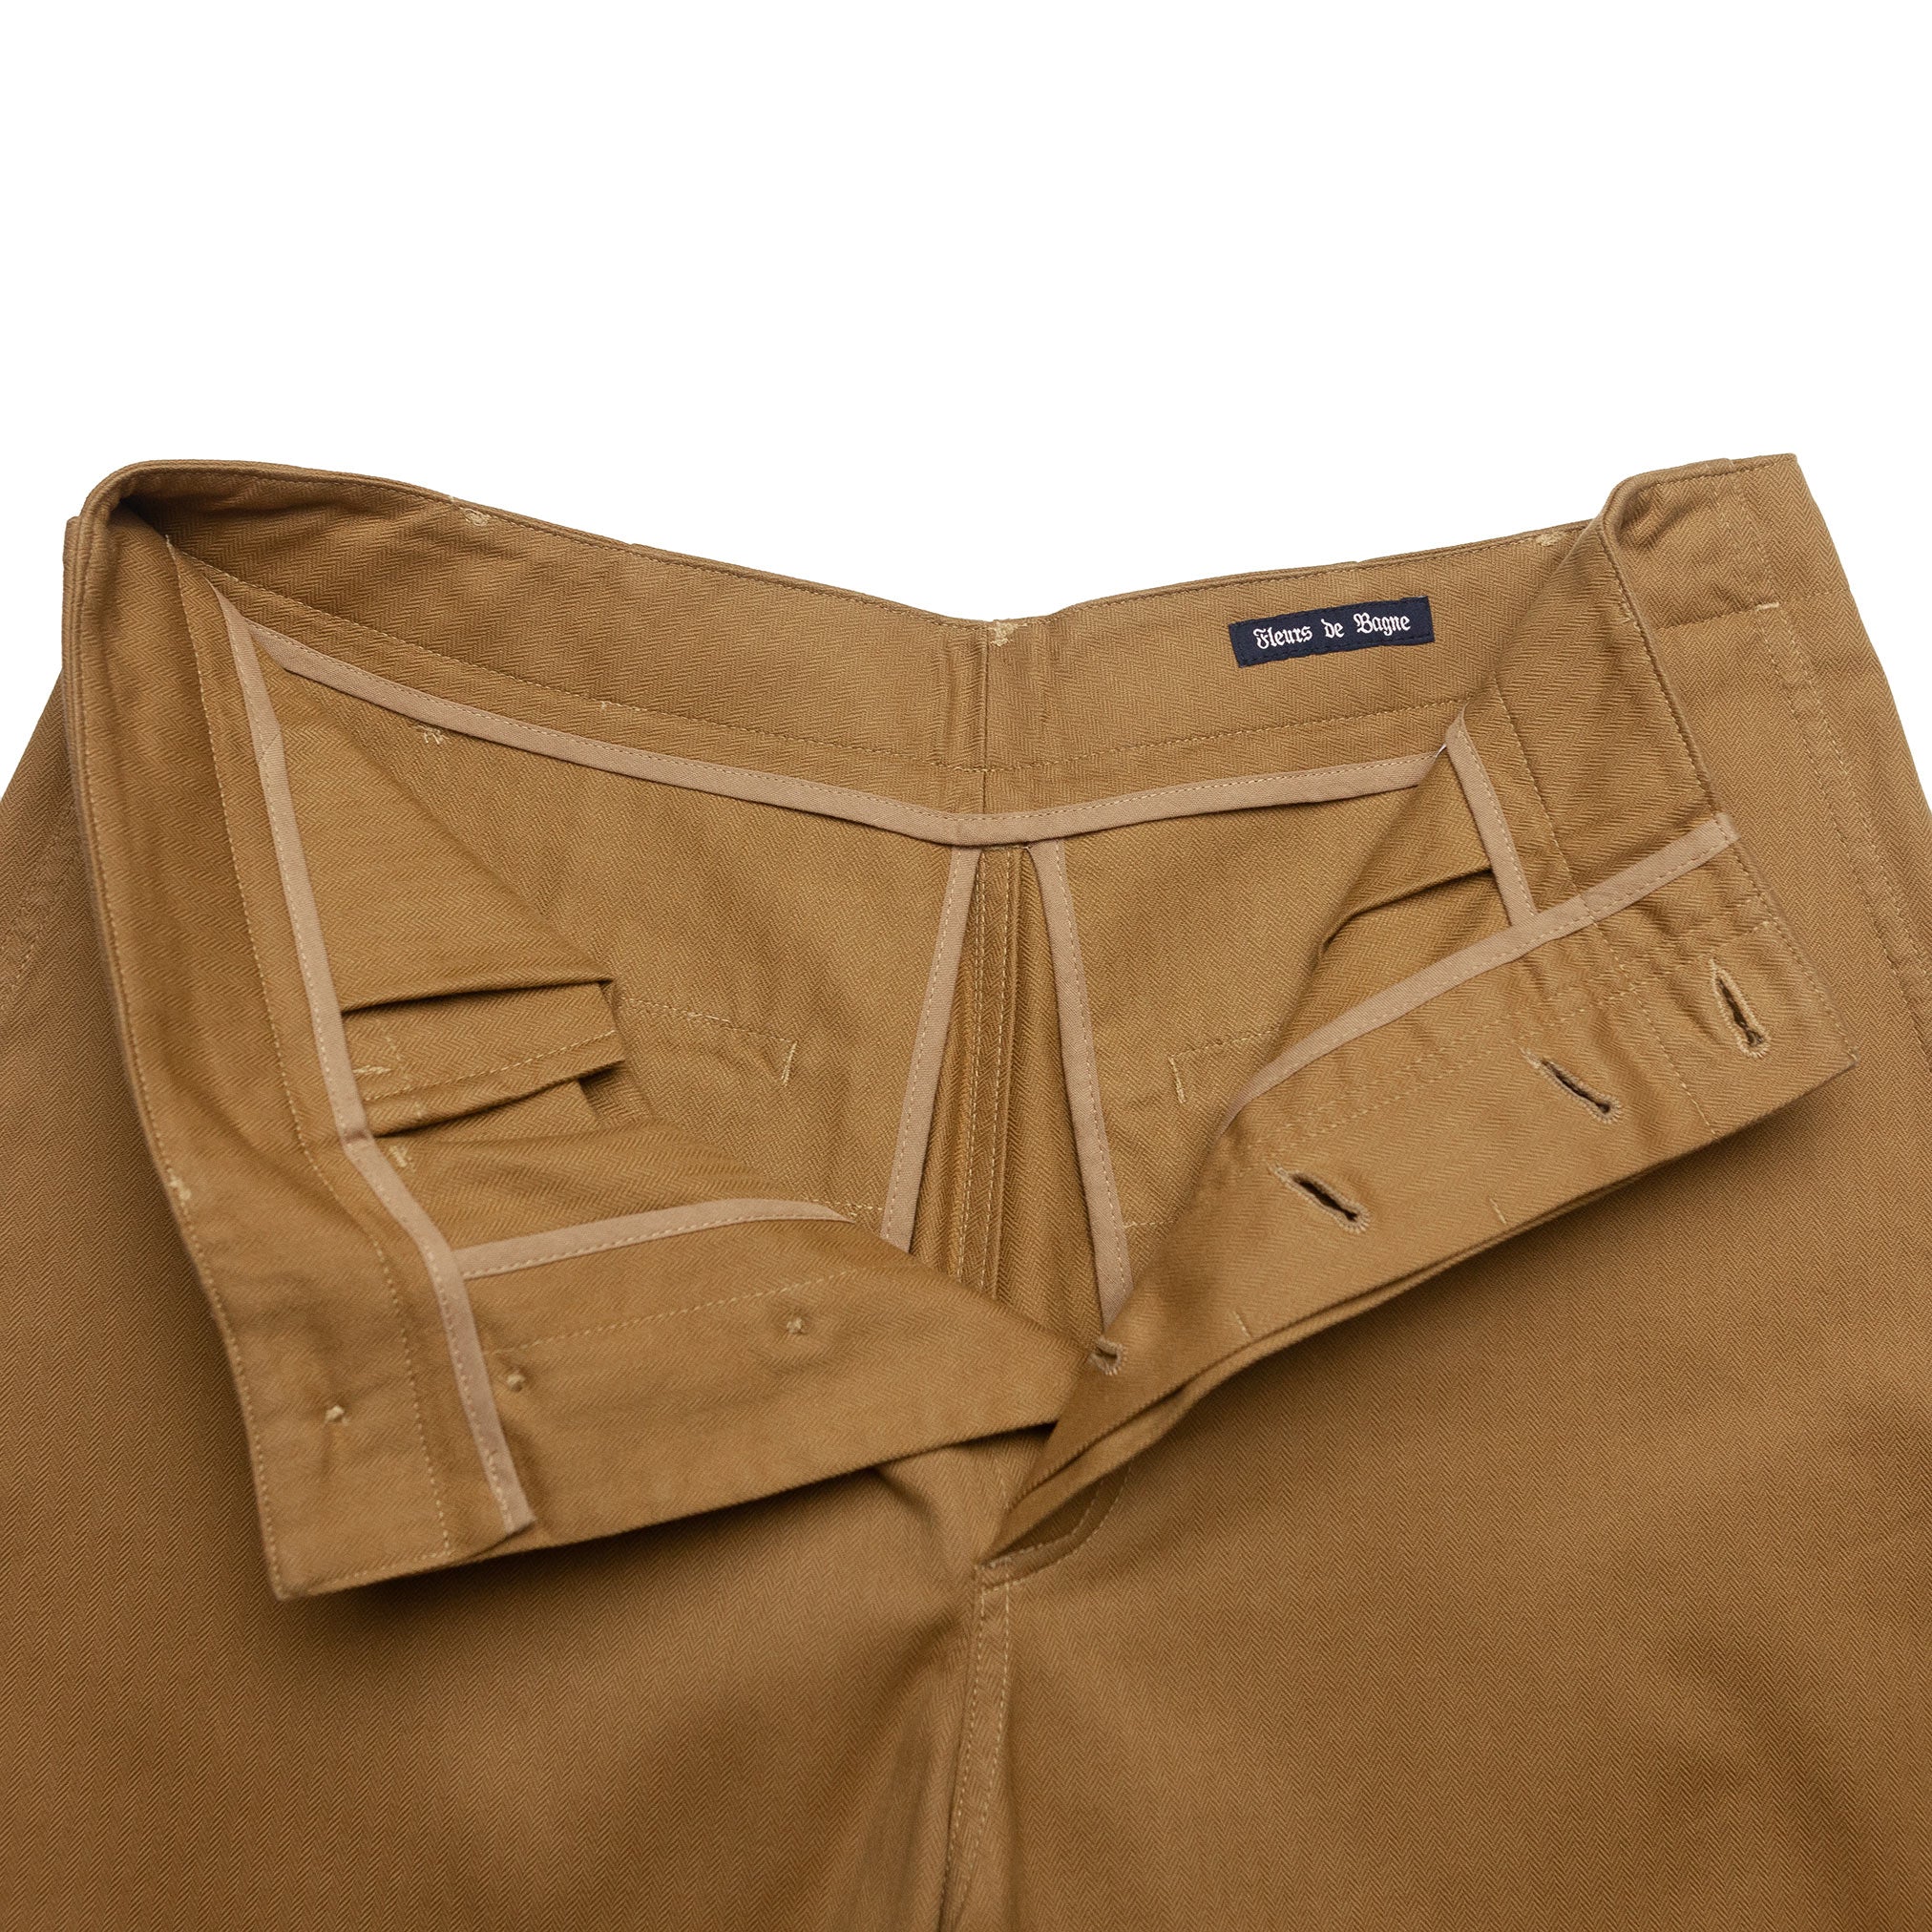 The Chino Short in Camel